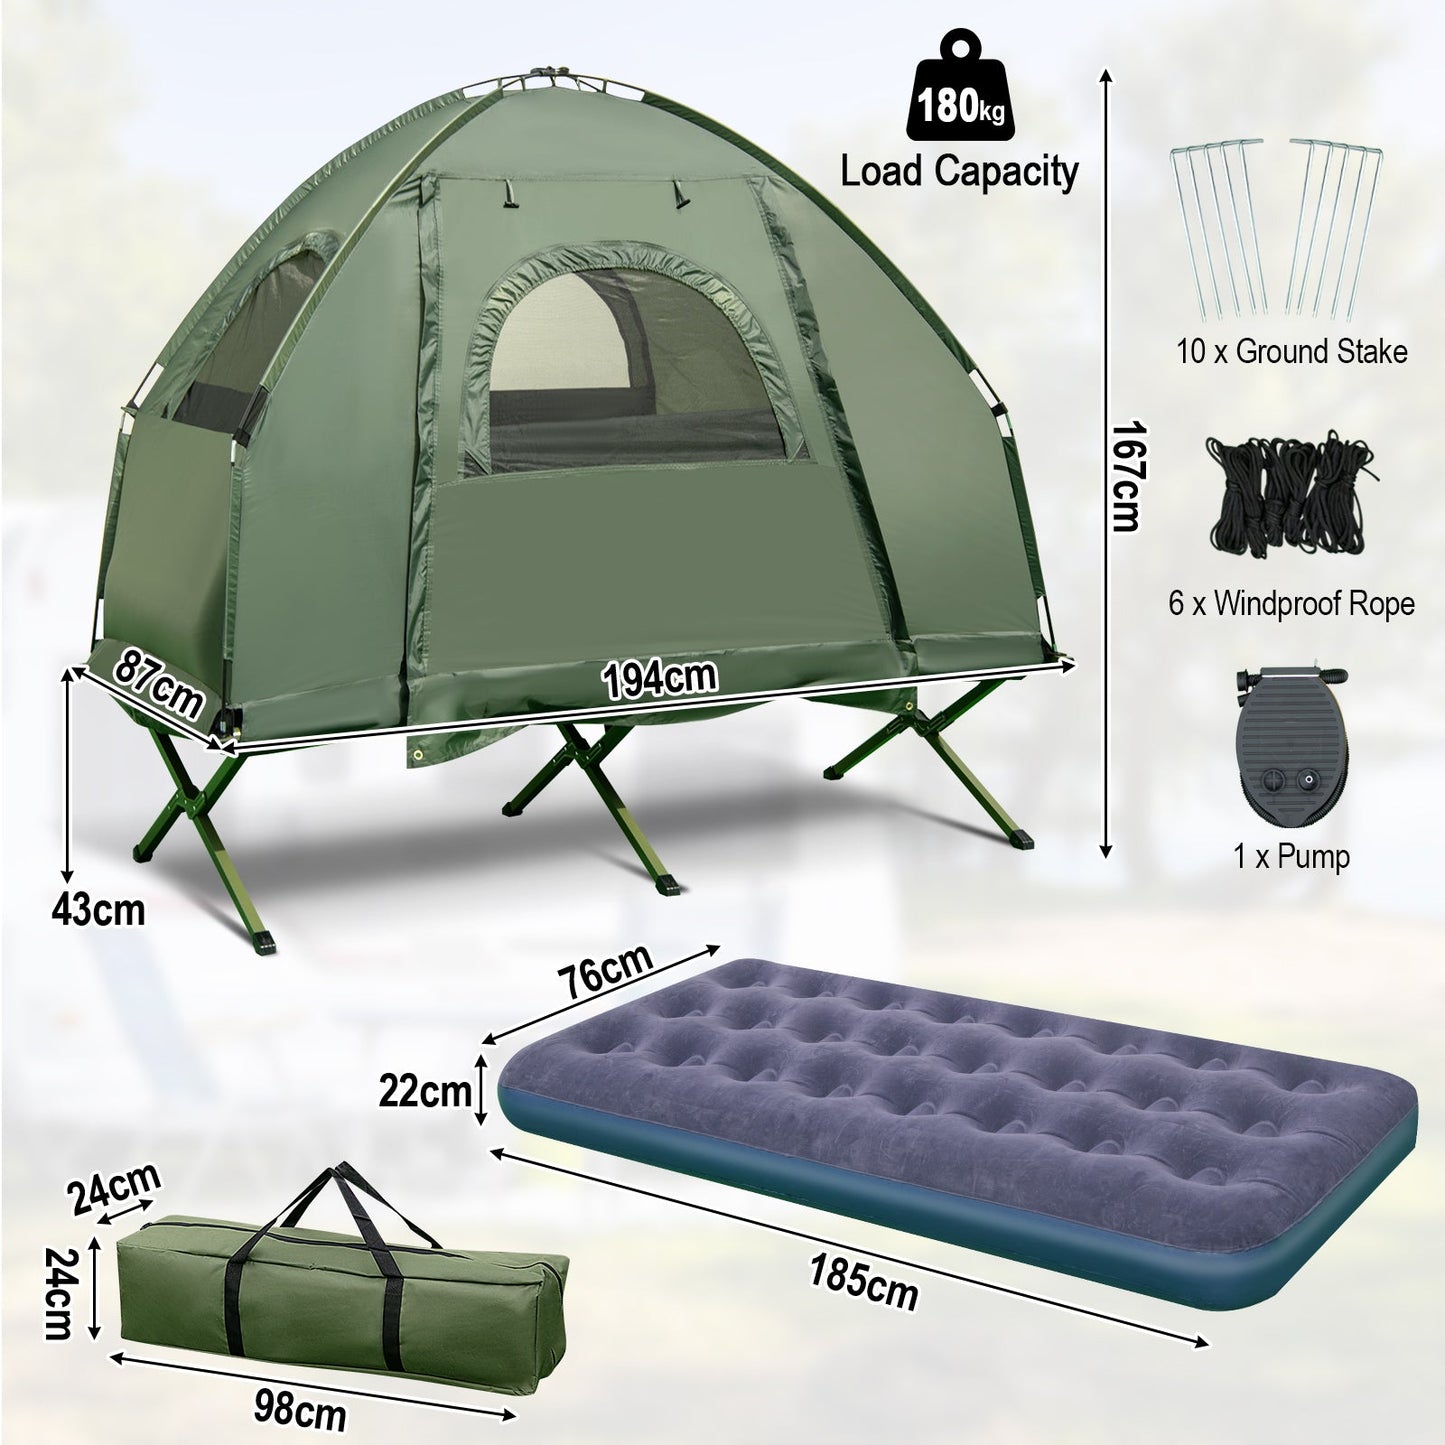 1/2 Person Foldable Camping Tent with Air Mattress Sleeping Bag-1 Person